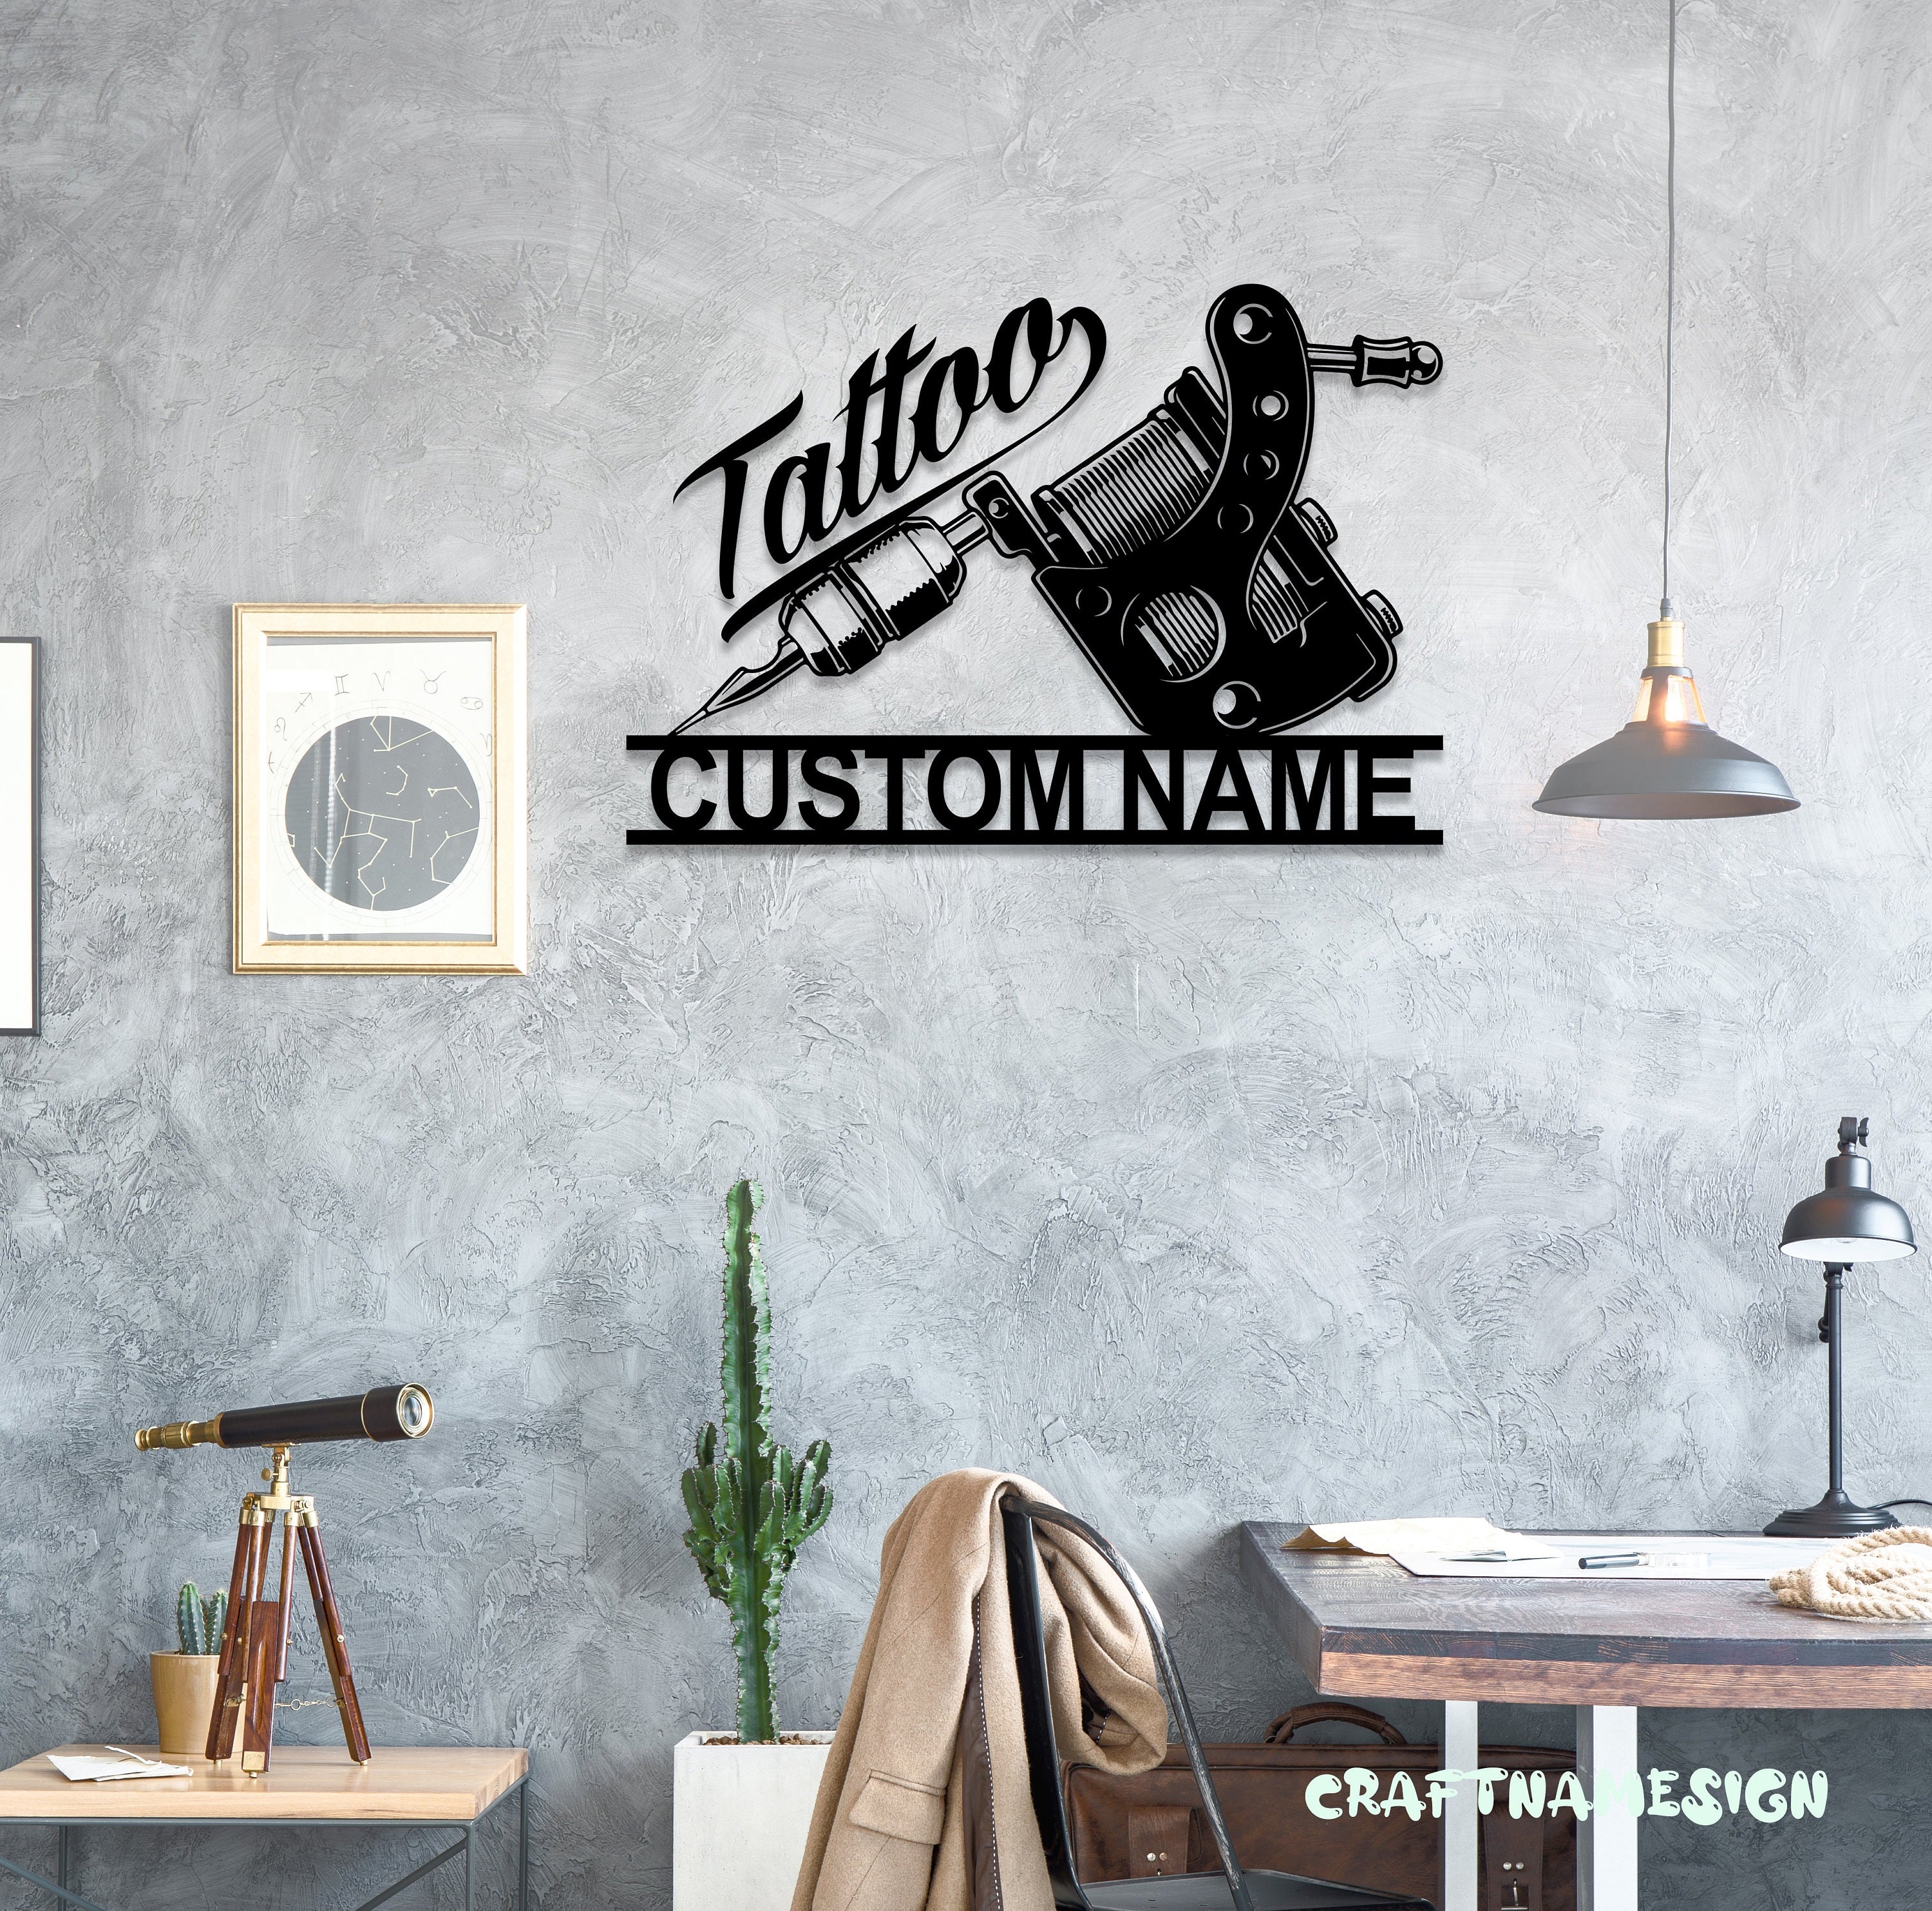 Personalized Tattoo Shop Sign Tattoo Studio Sign Tattoo Business Sign Tattoo  Artist Gifts - Custom Laser Cut Metal Art & Signs, Gift & Home Decor